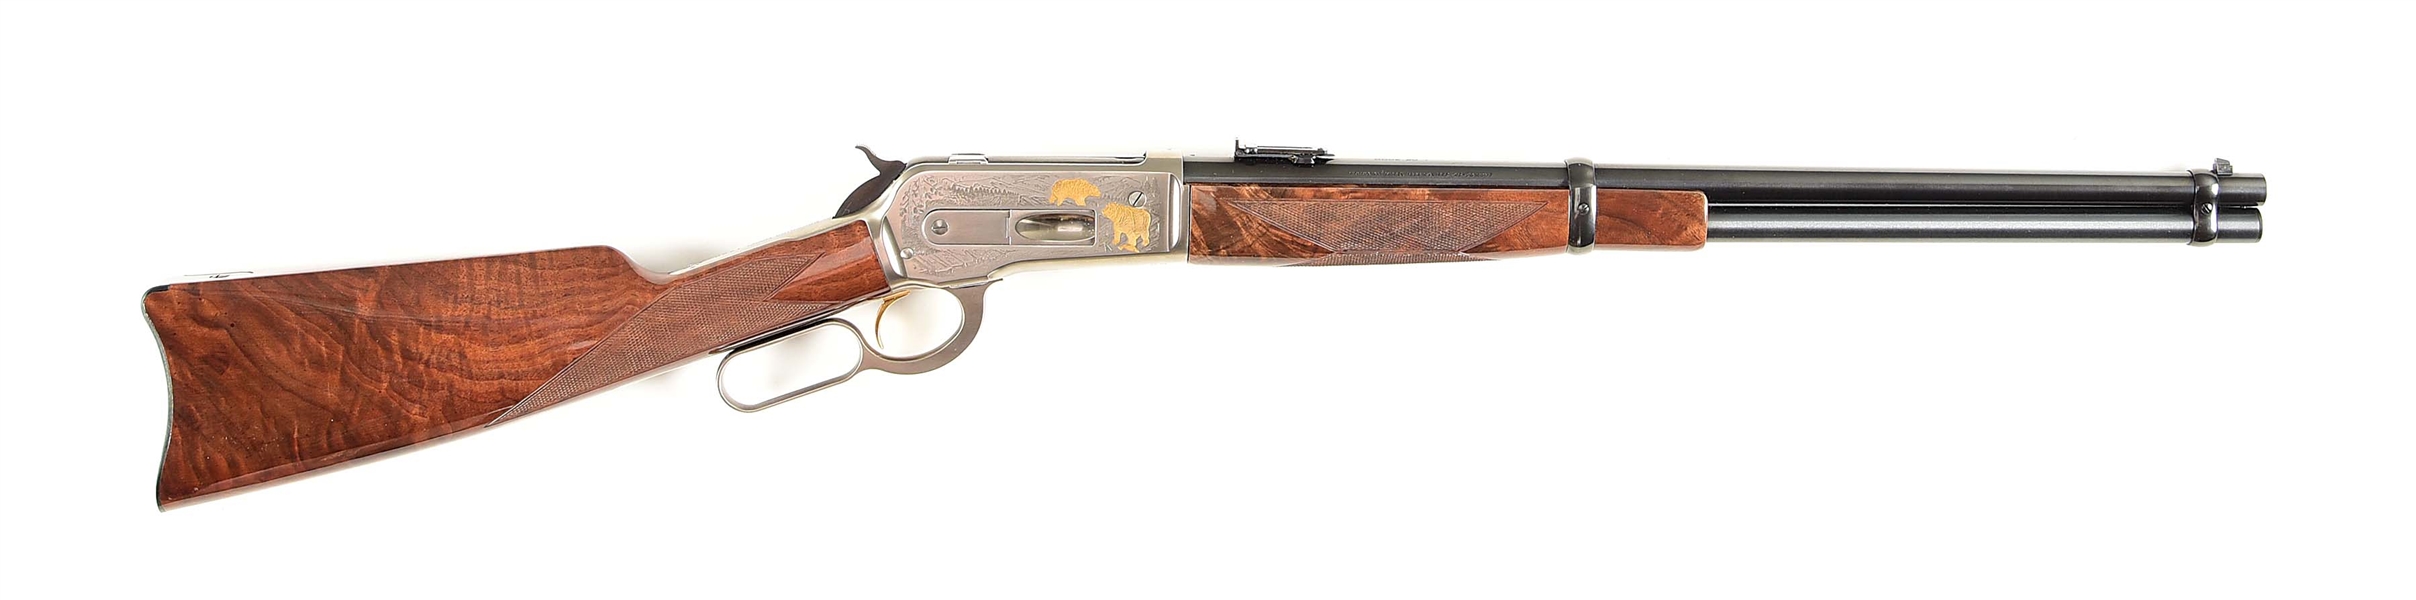 (M) T. MORI ENGRAVED BROWNING MODEL 1886 (1 OF 3000) HIGH GRADE LEVER ACTION SADDLE RING CARBINE.